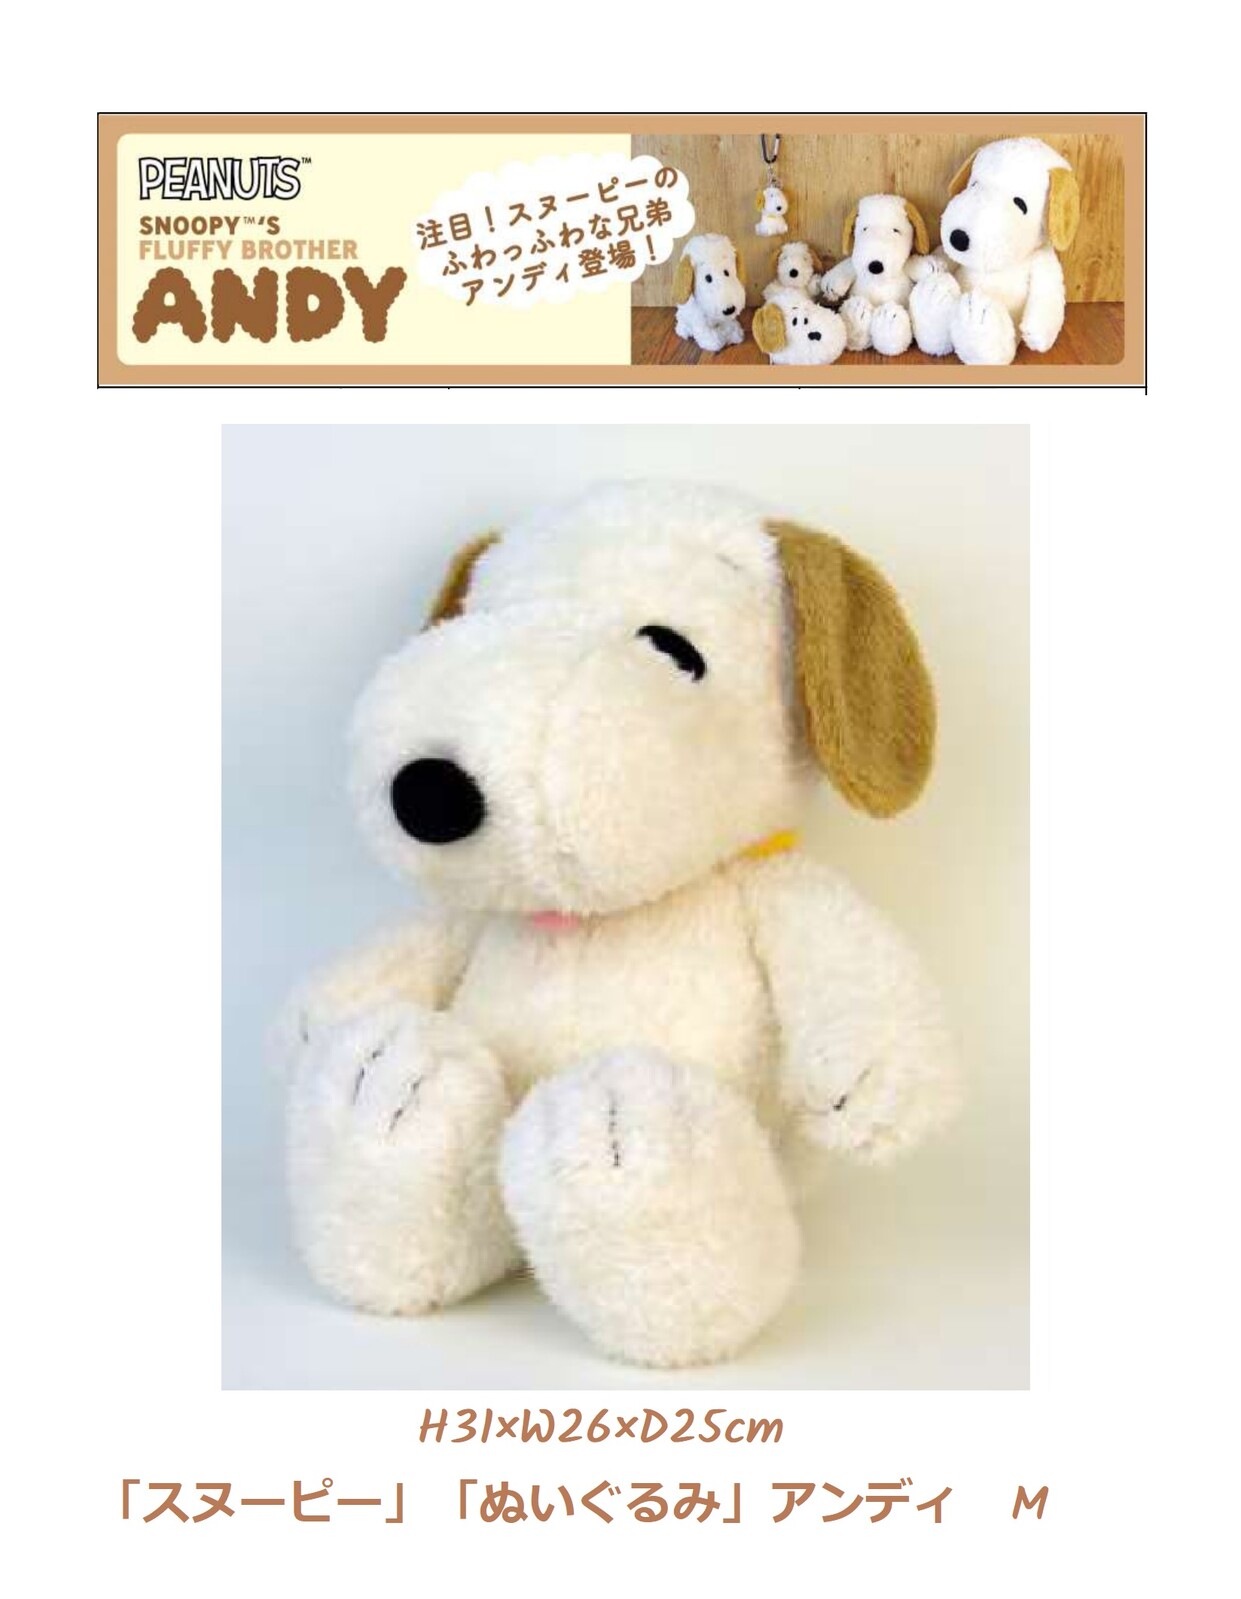 Snoopy Soft Toy Andy Import Japanese Products At Wholesale Prices Super Delivery